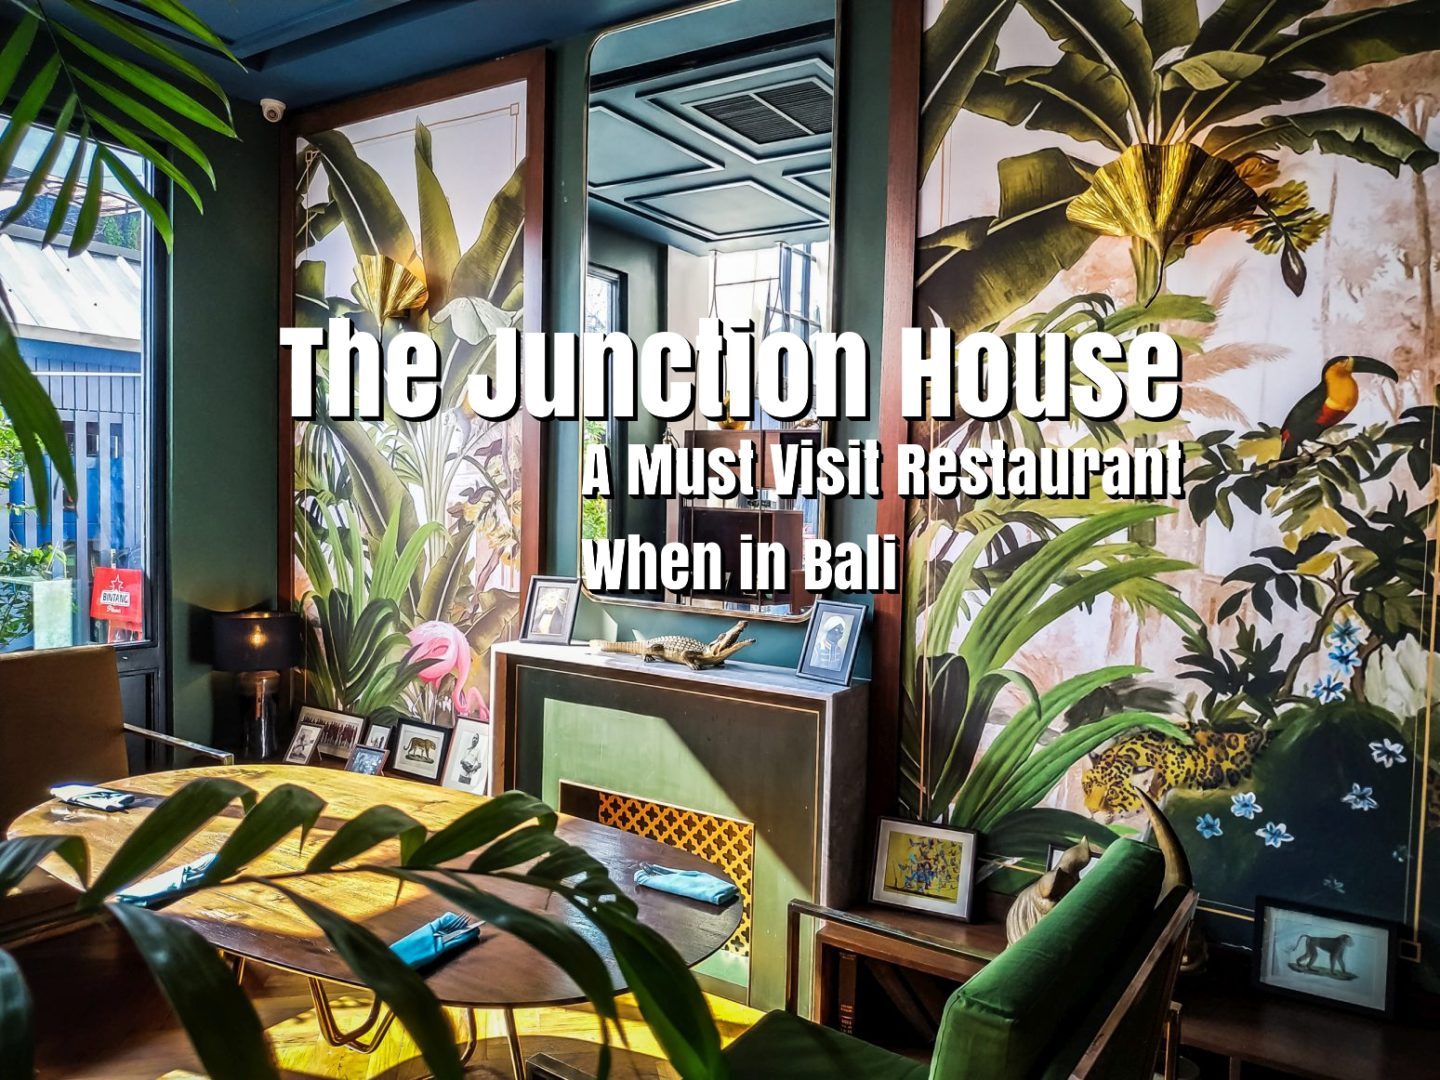 The Junction House Bali: A Must Visit Restaurant When in Bali